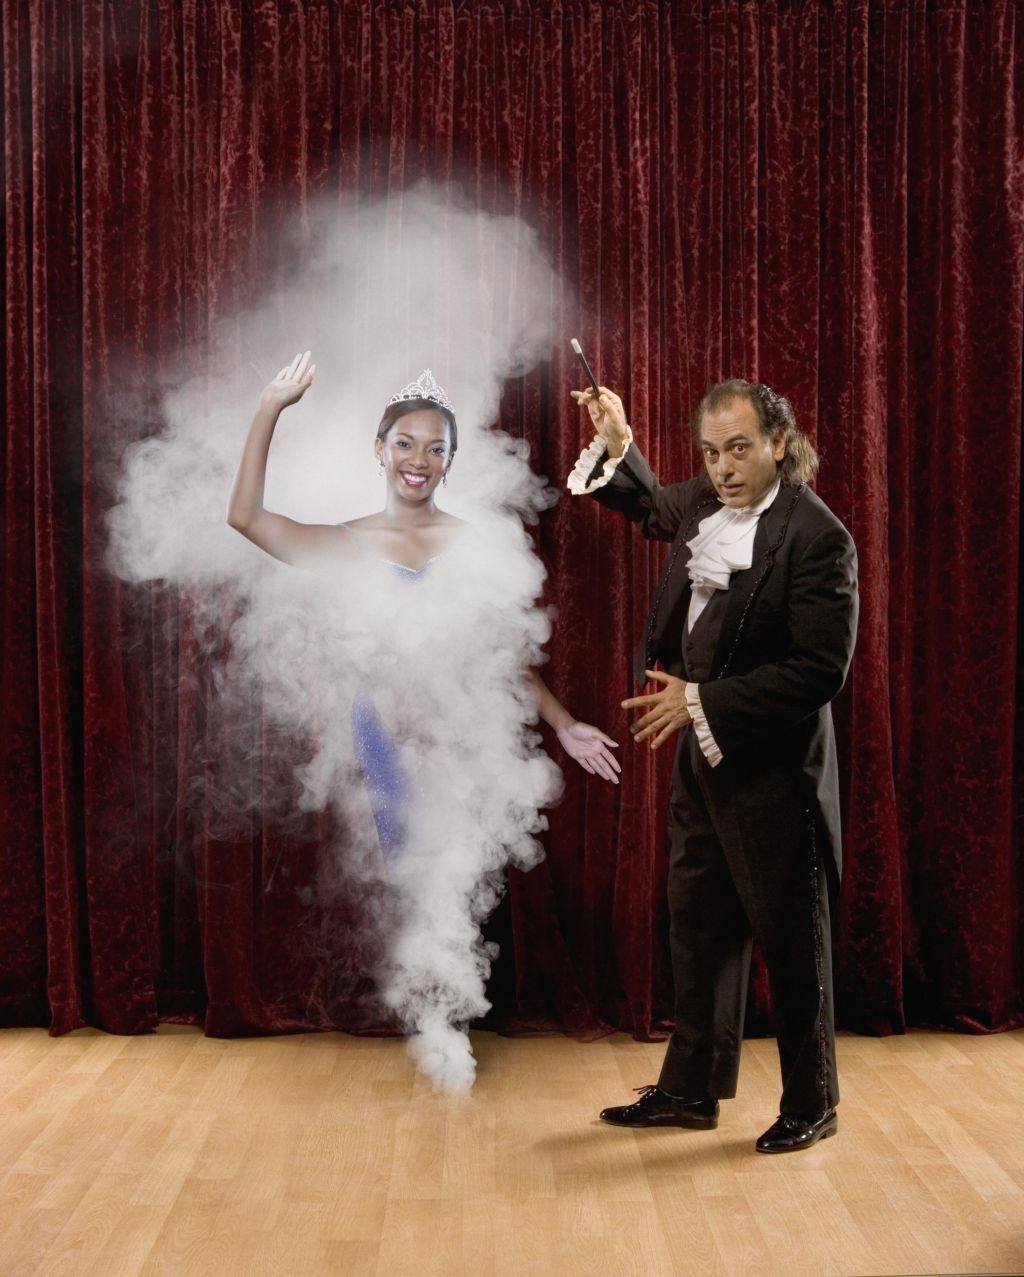 Magician making woman appear out of thin air